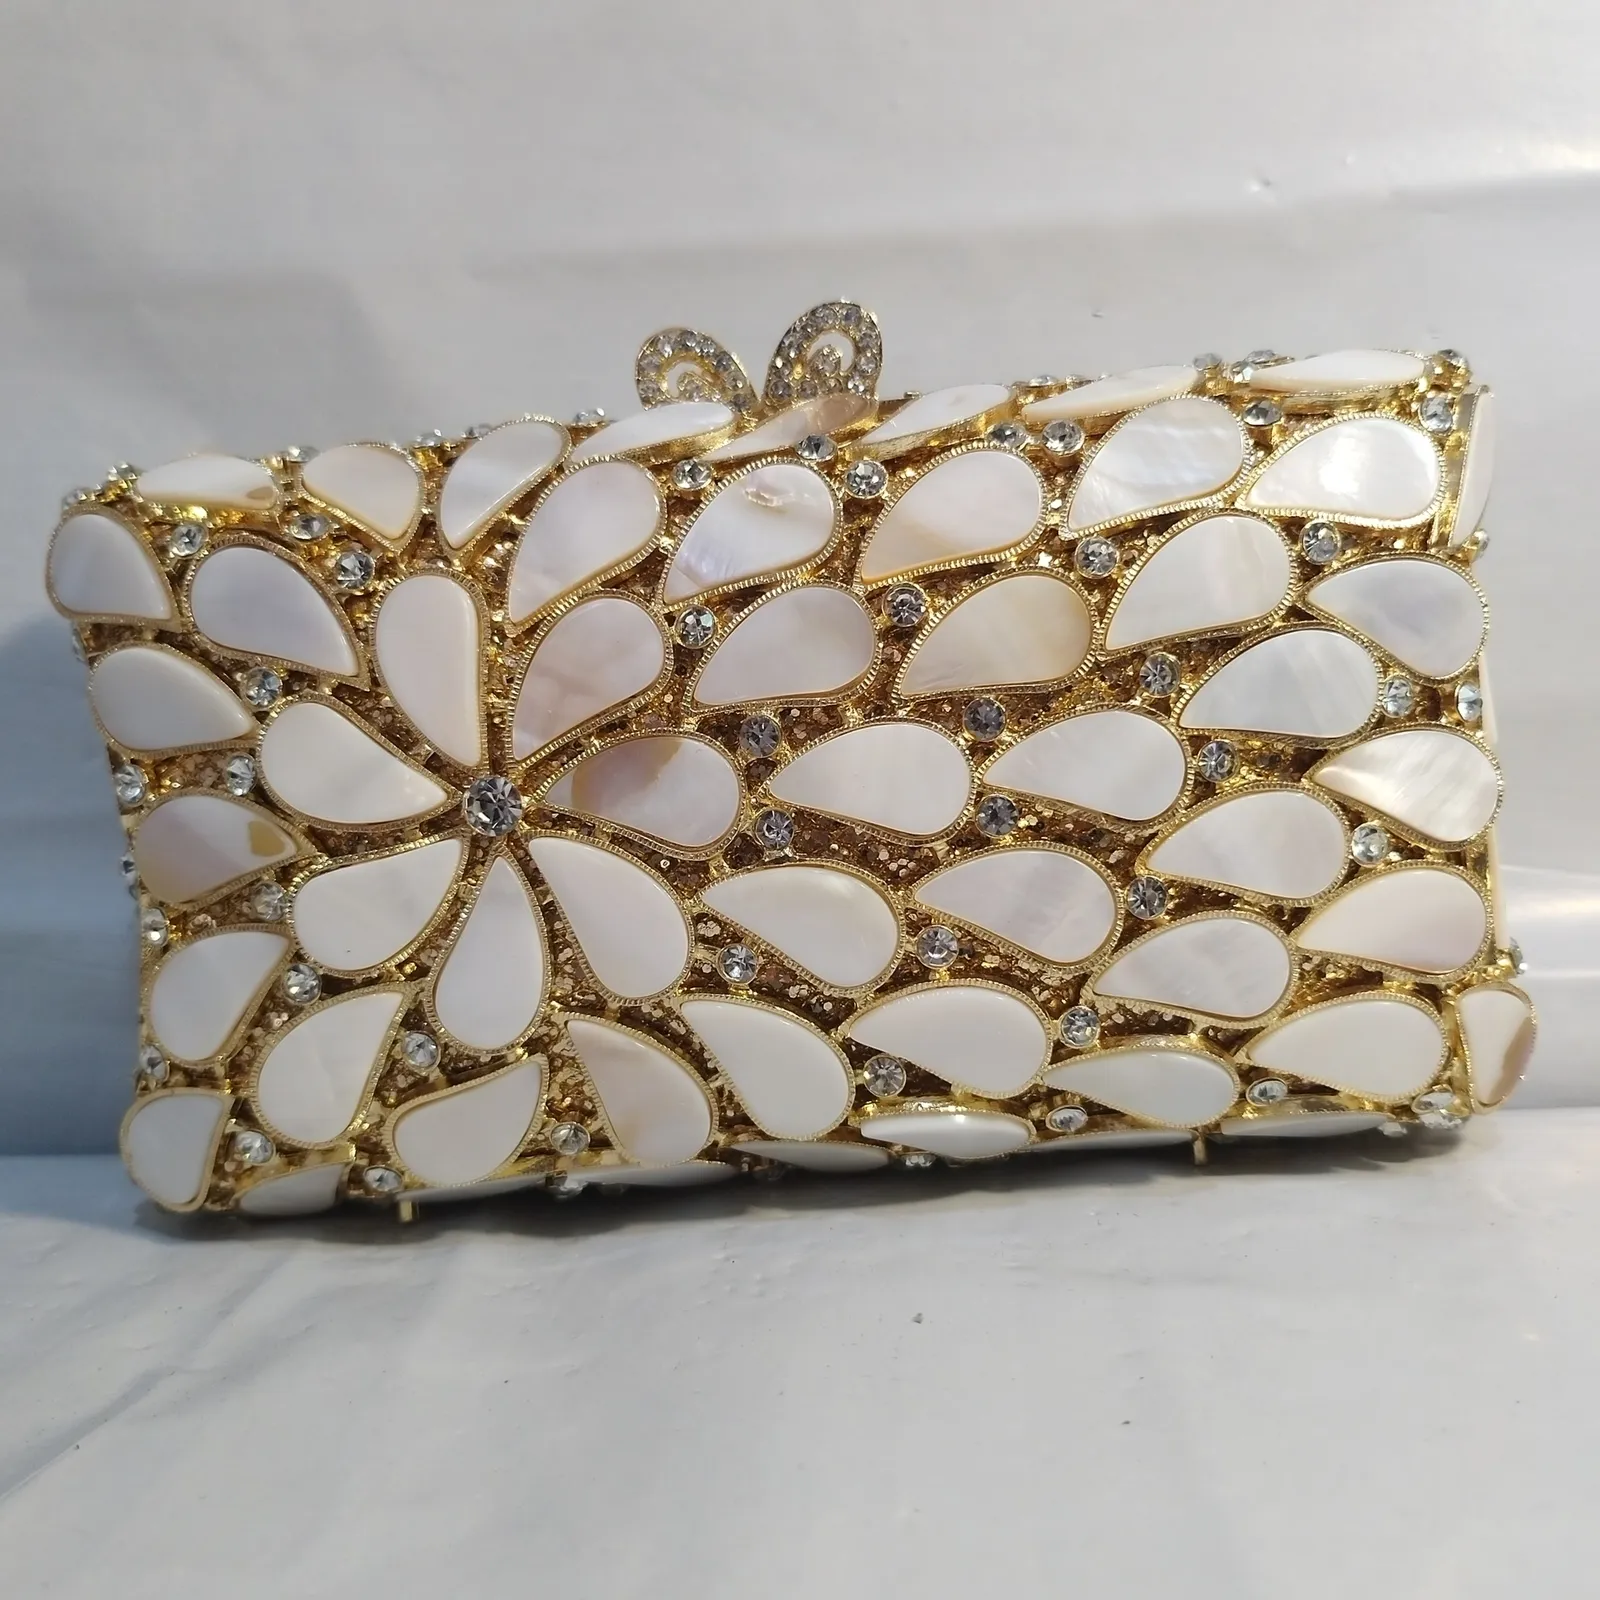 Gold/Silver Shell Evening Clutch Purse With Pink Stones For Women